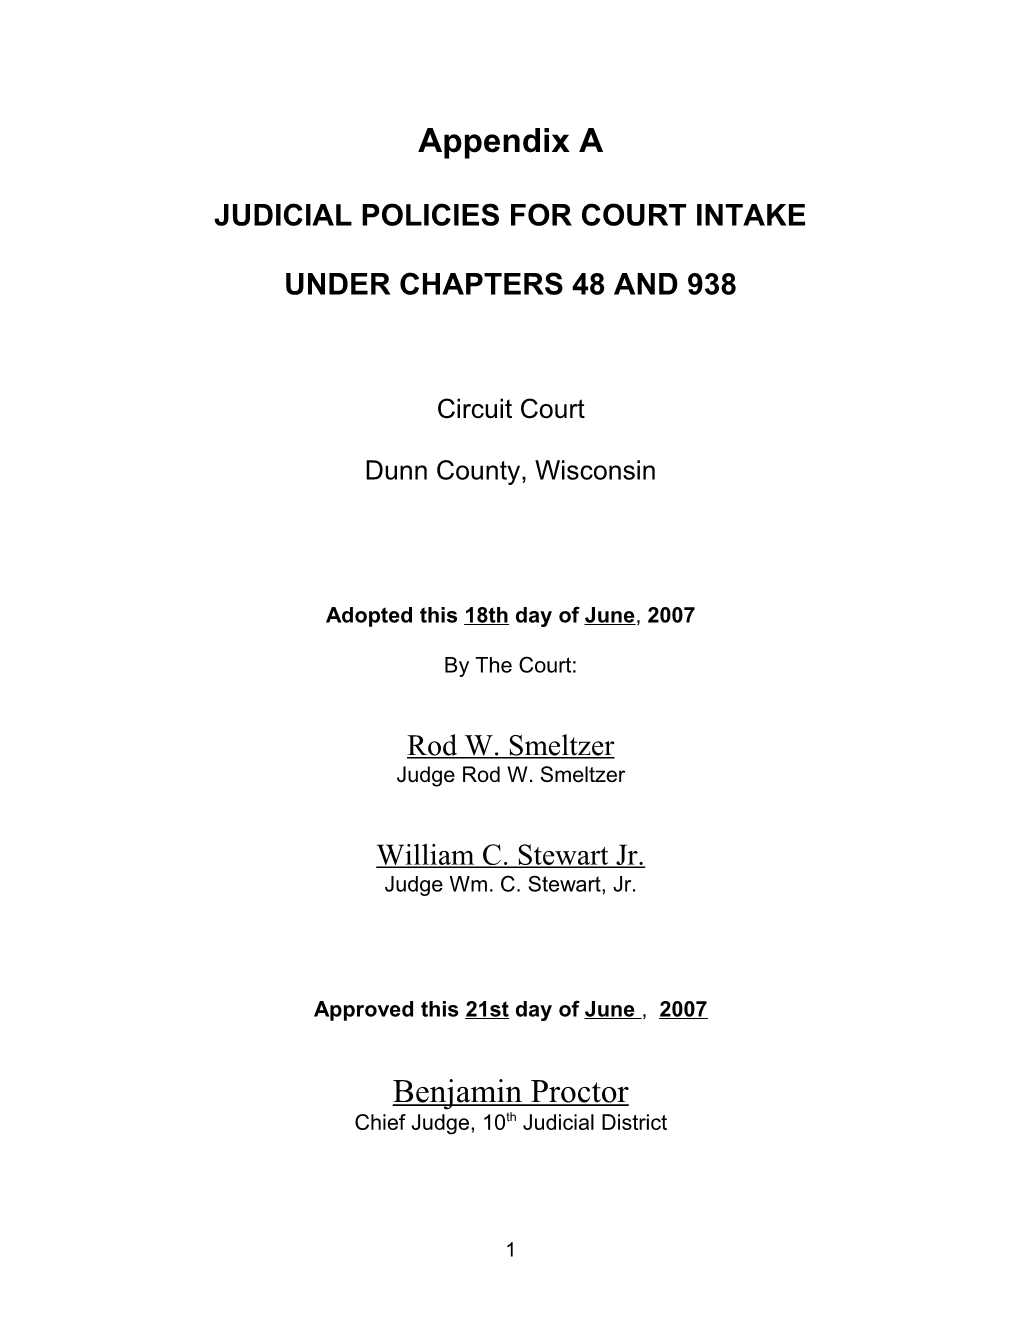 Judicial Policies for Court Intake